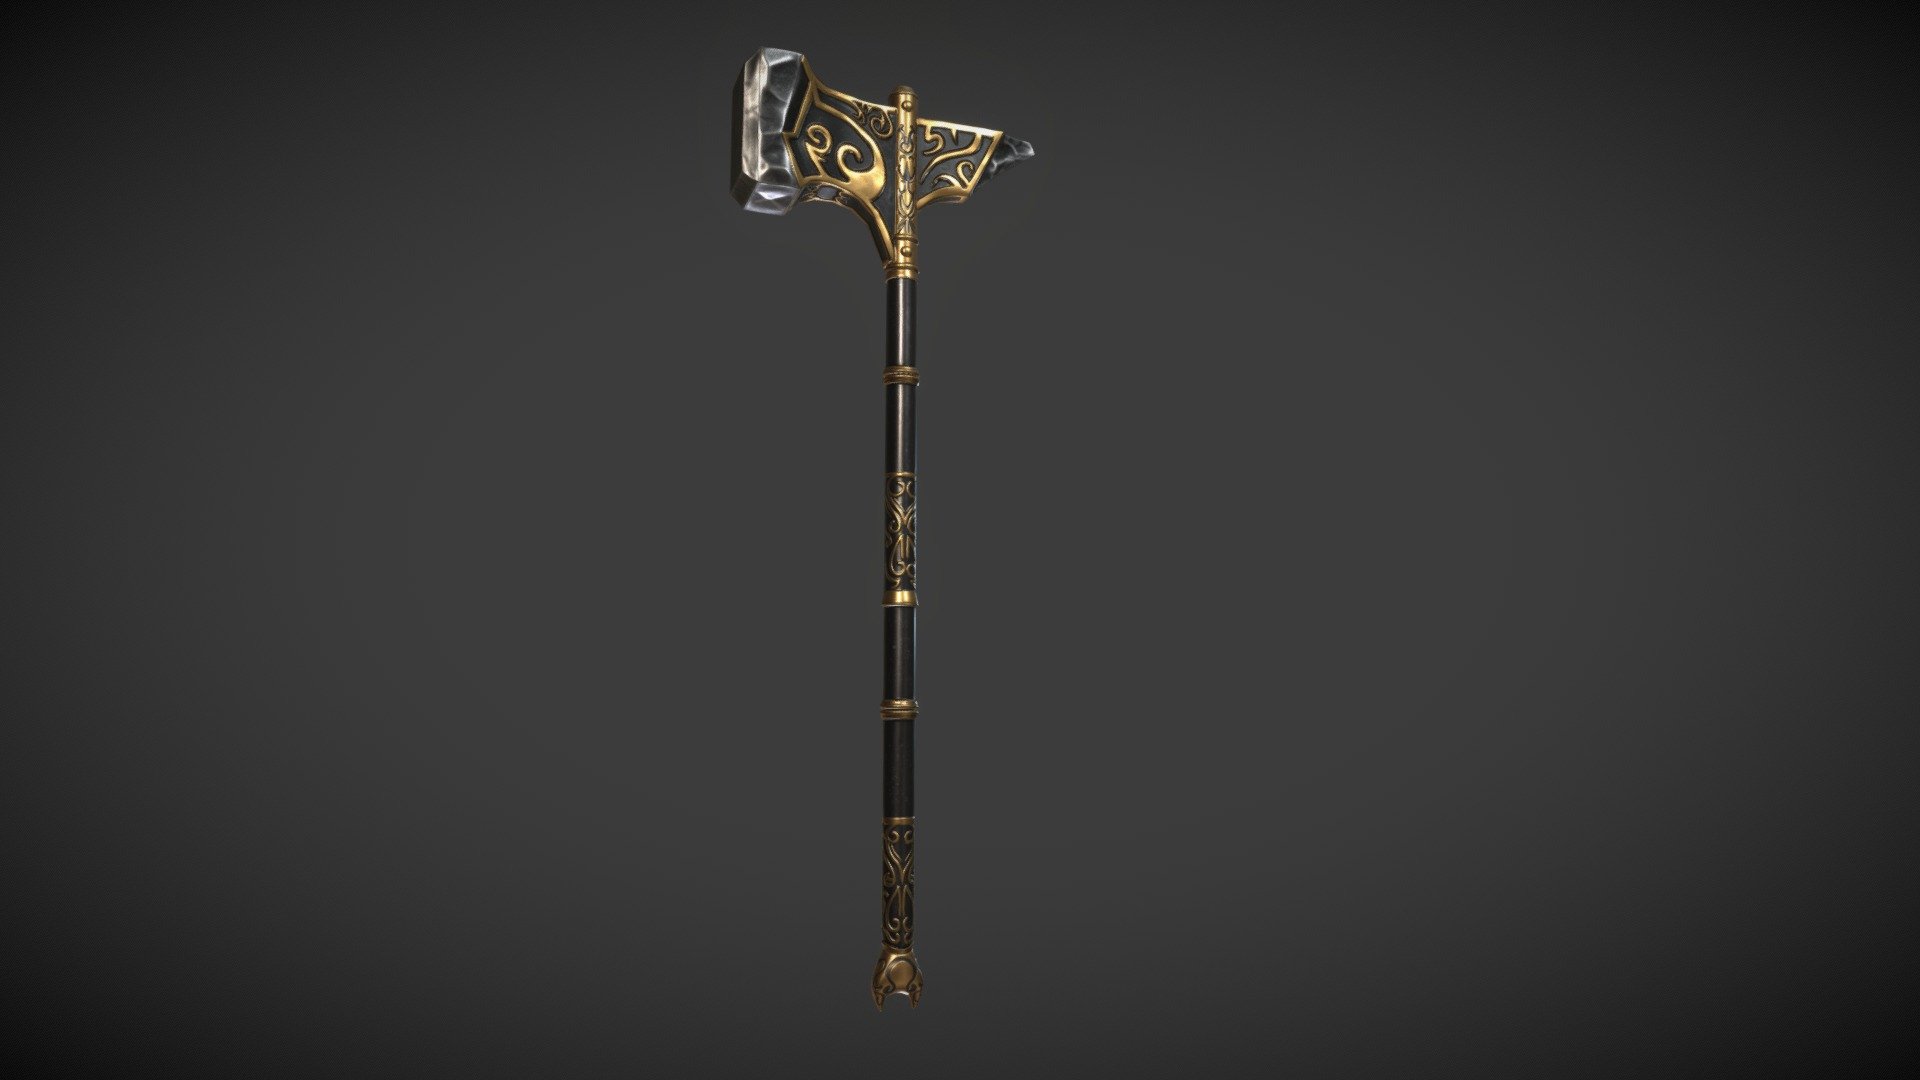 This is a remake of TES:Oblivion’s iconic Ebony War Hammer, made for the upcoming massive mod named TES:Skyblivion. Concept art by Roberto Gatto - Ebony War Hammer - TES:Skyblivion - 3D model by Spyros Frigas (@Spyros_F) 3d model